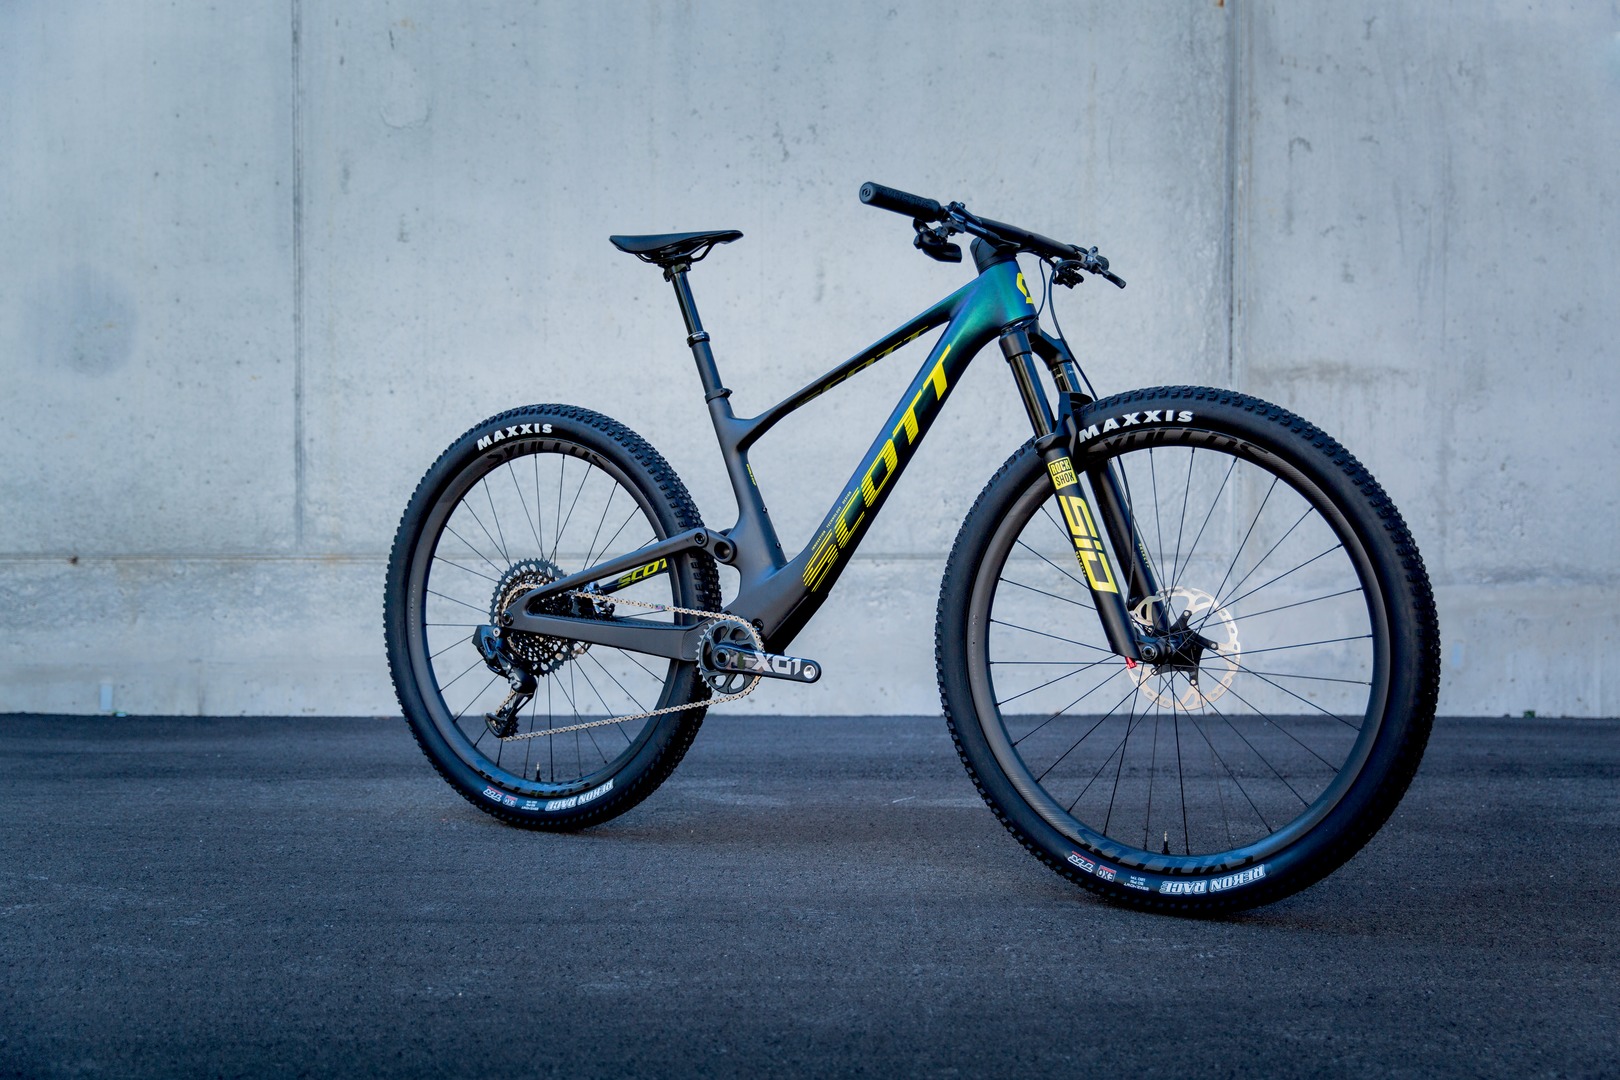 Scott's 2022 Spark RC And Spark 900 Take Integrated Design To The Next